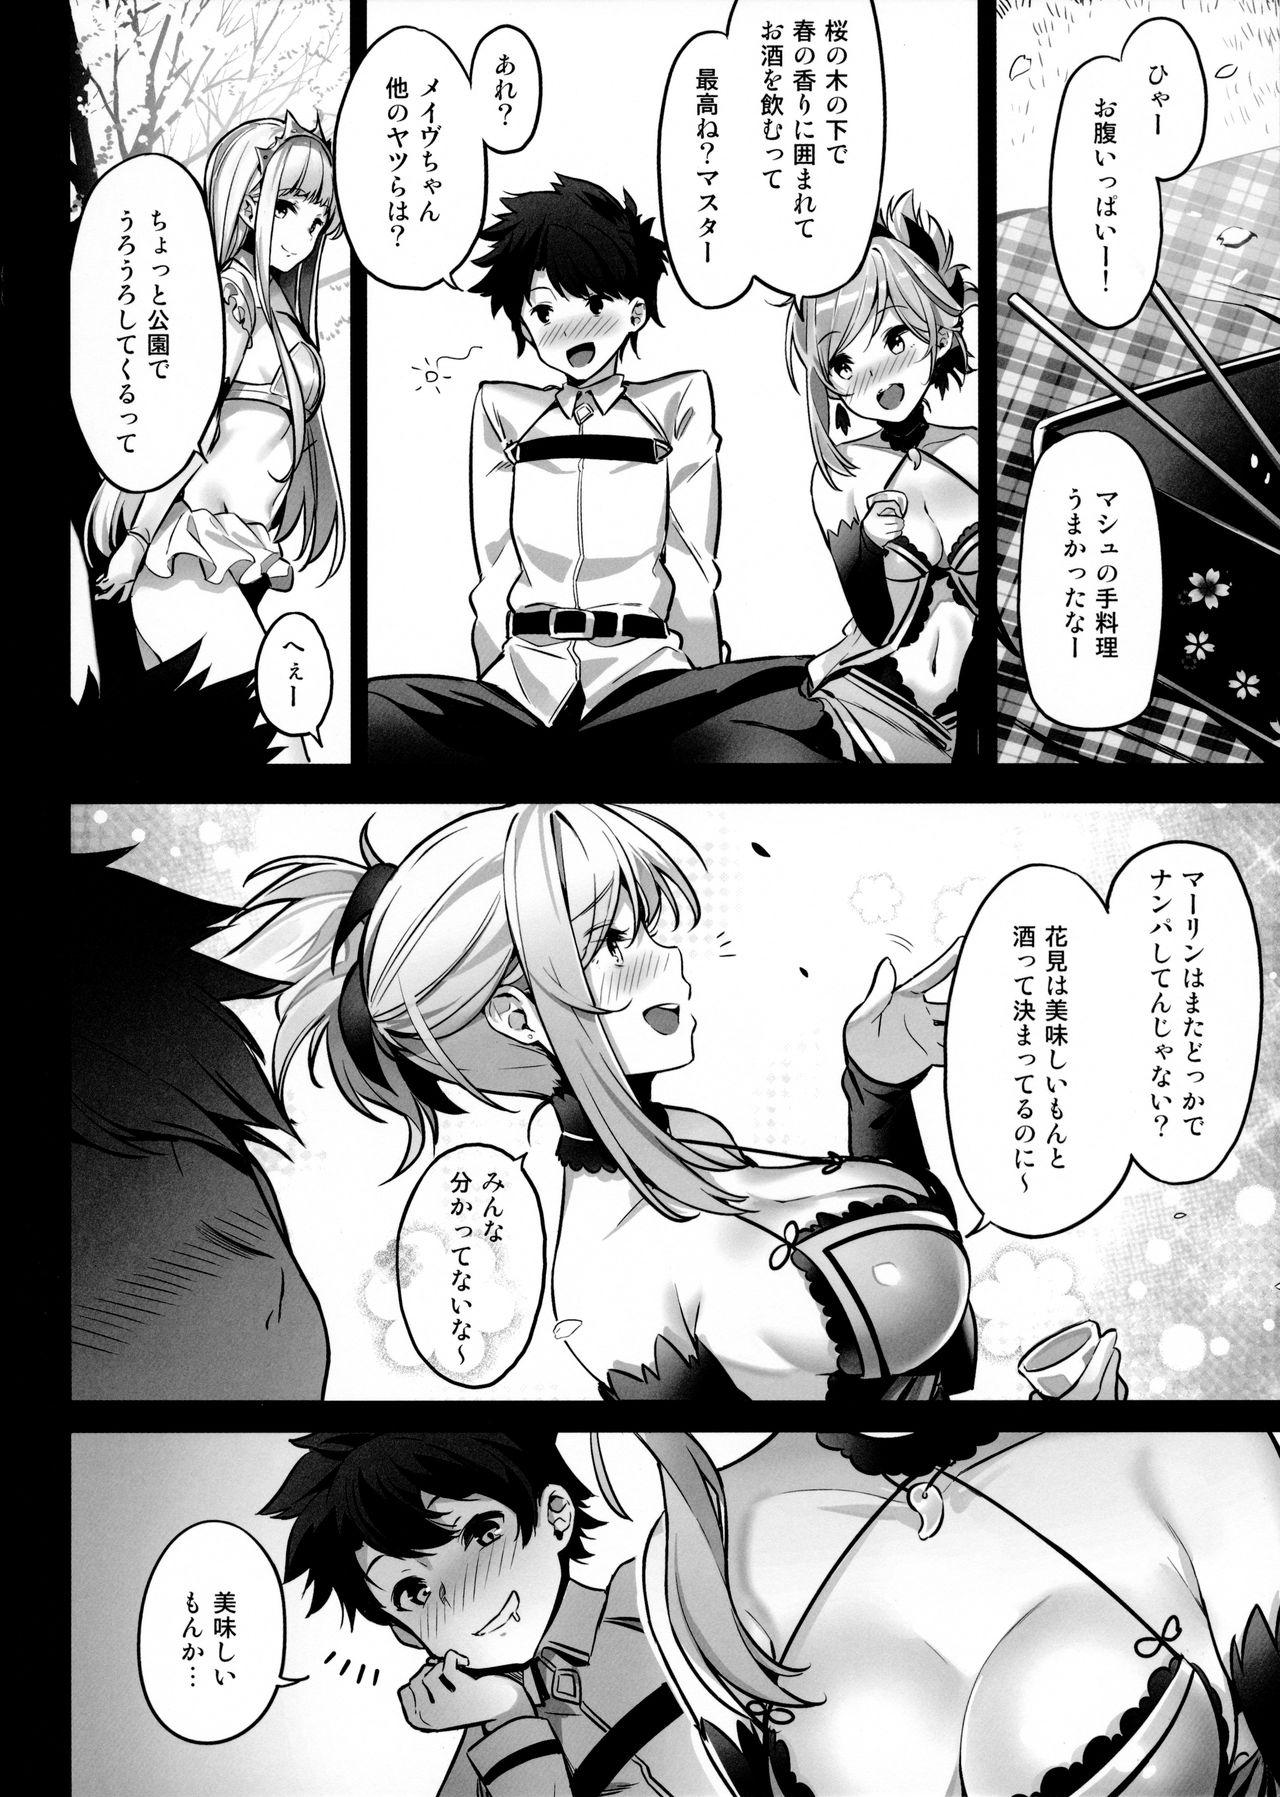 Sixtynine moon phase material - Fate grand order Culonas - Page 5